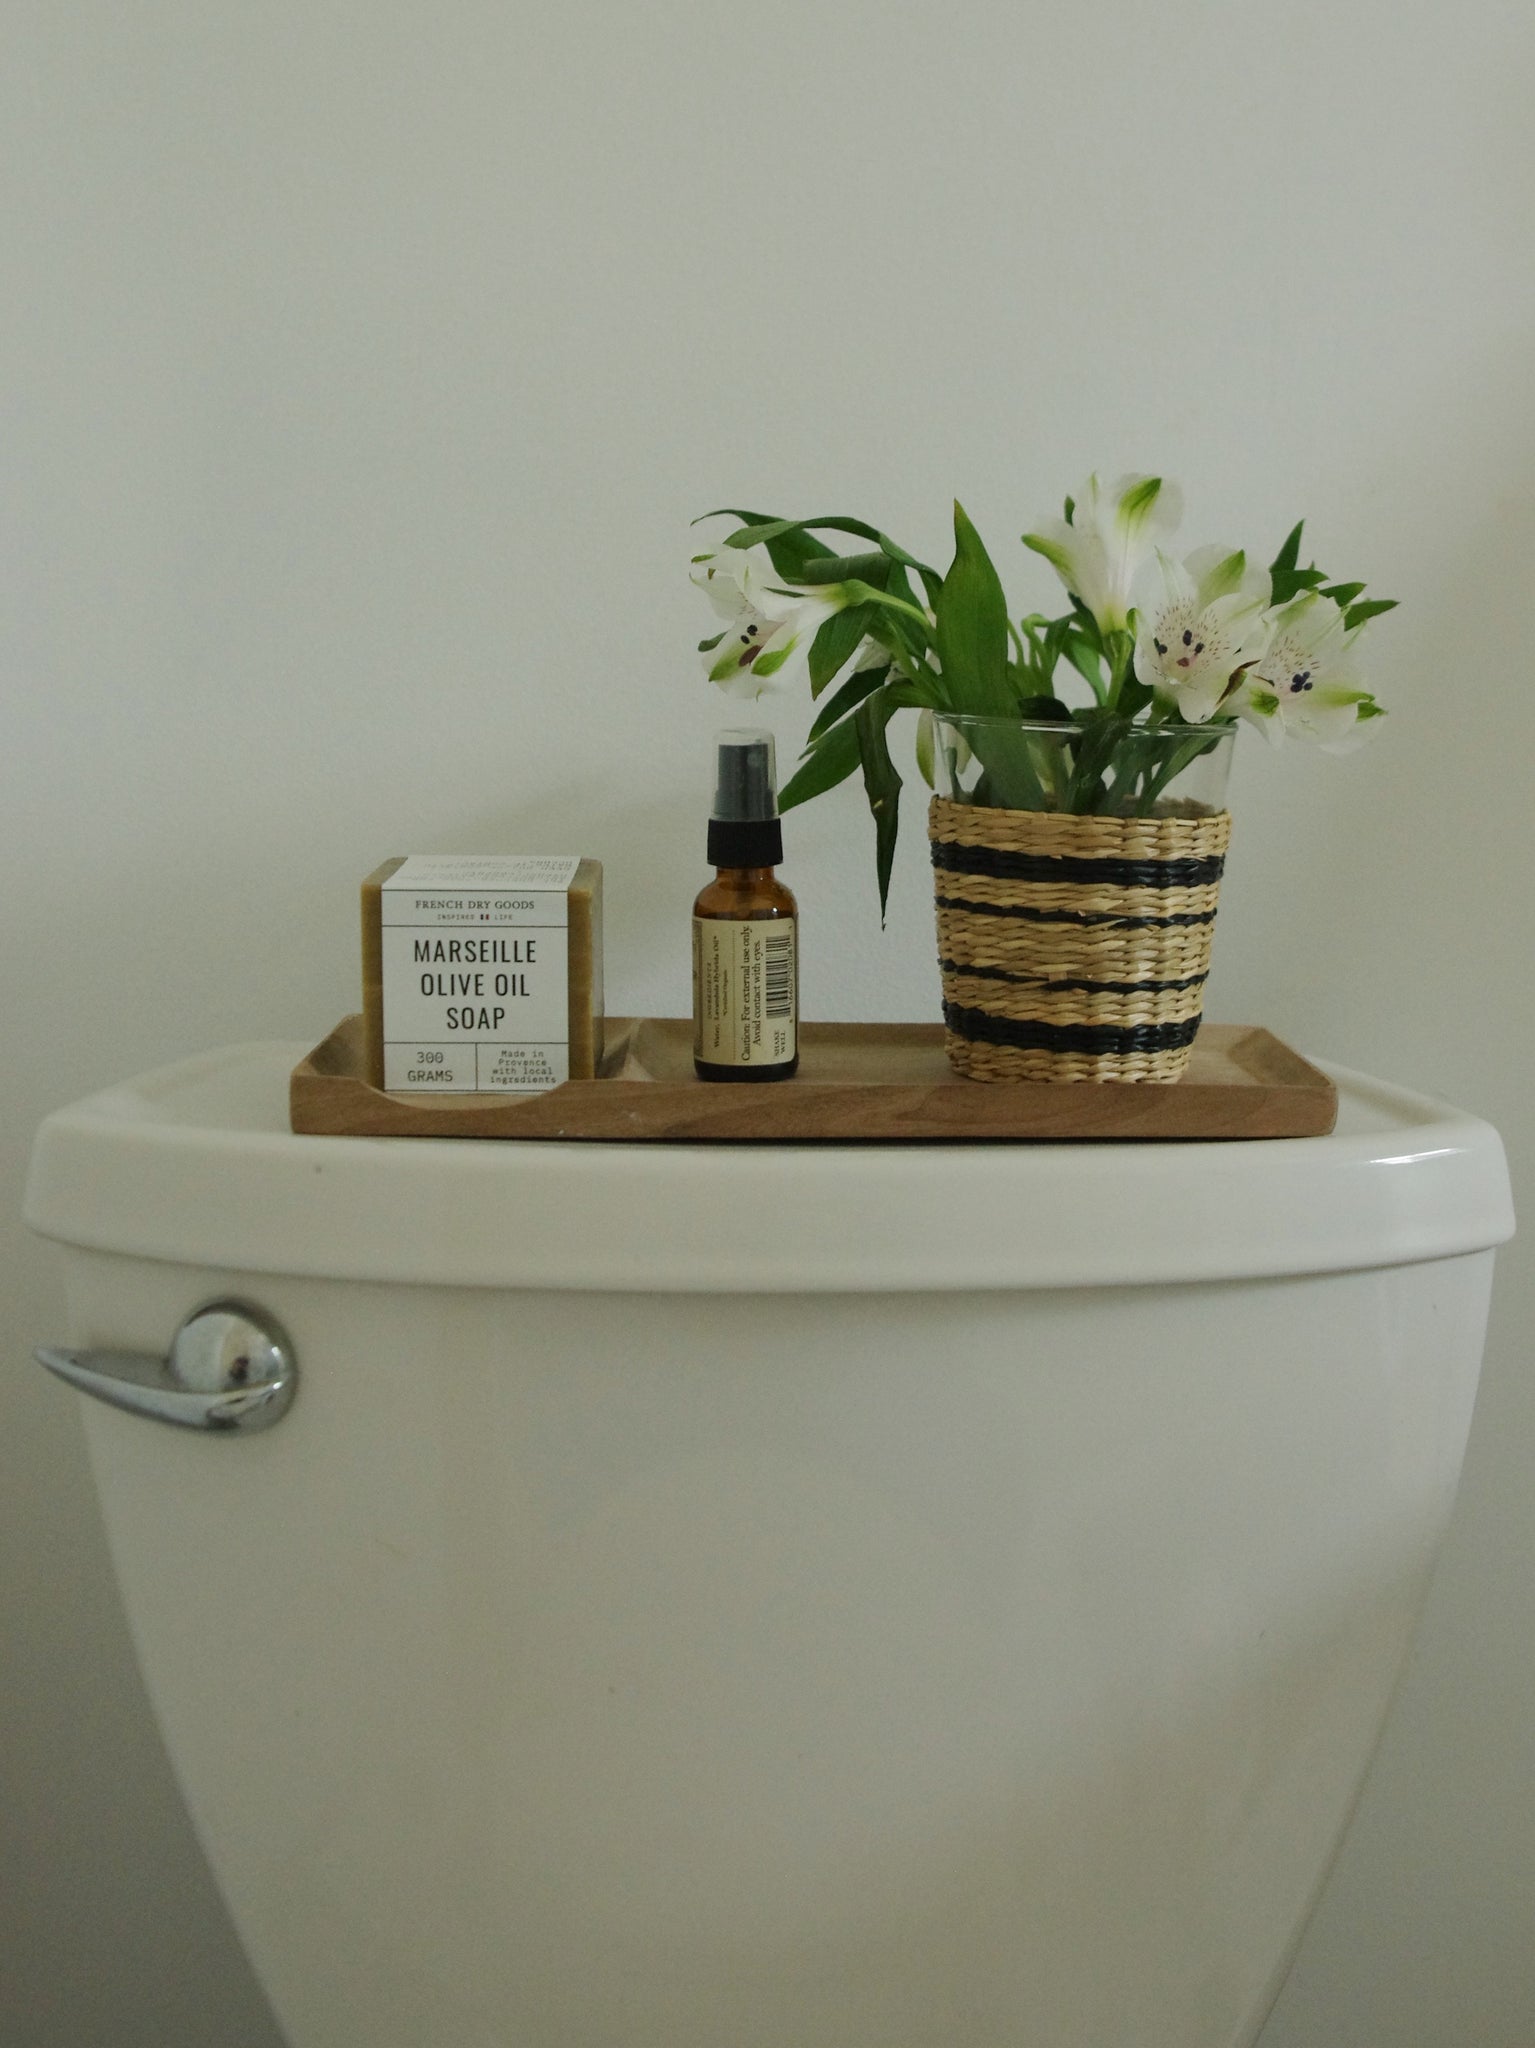 Wooden bathroom tray holding soap, spray, and flowers.